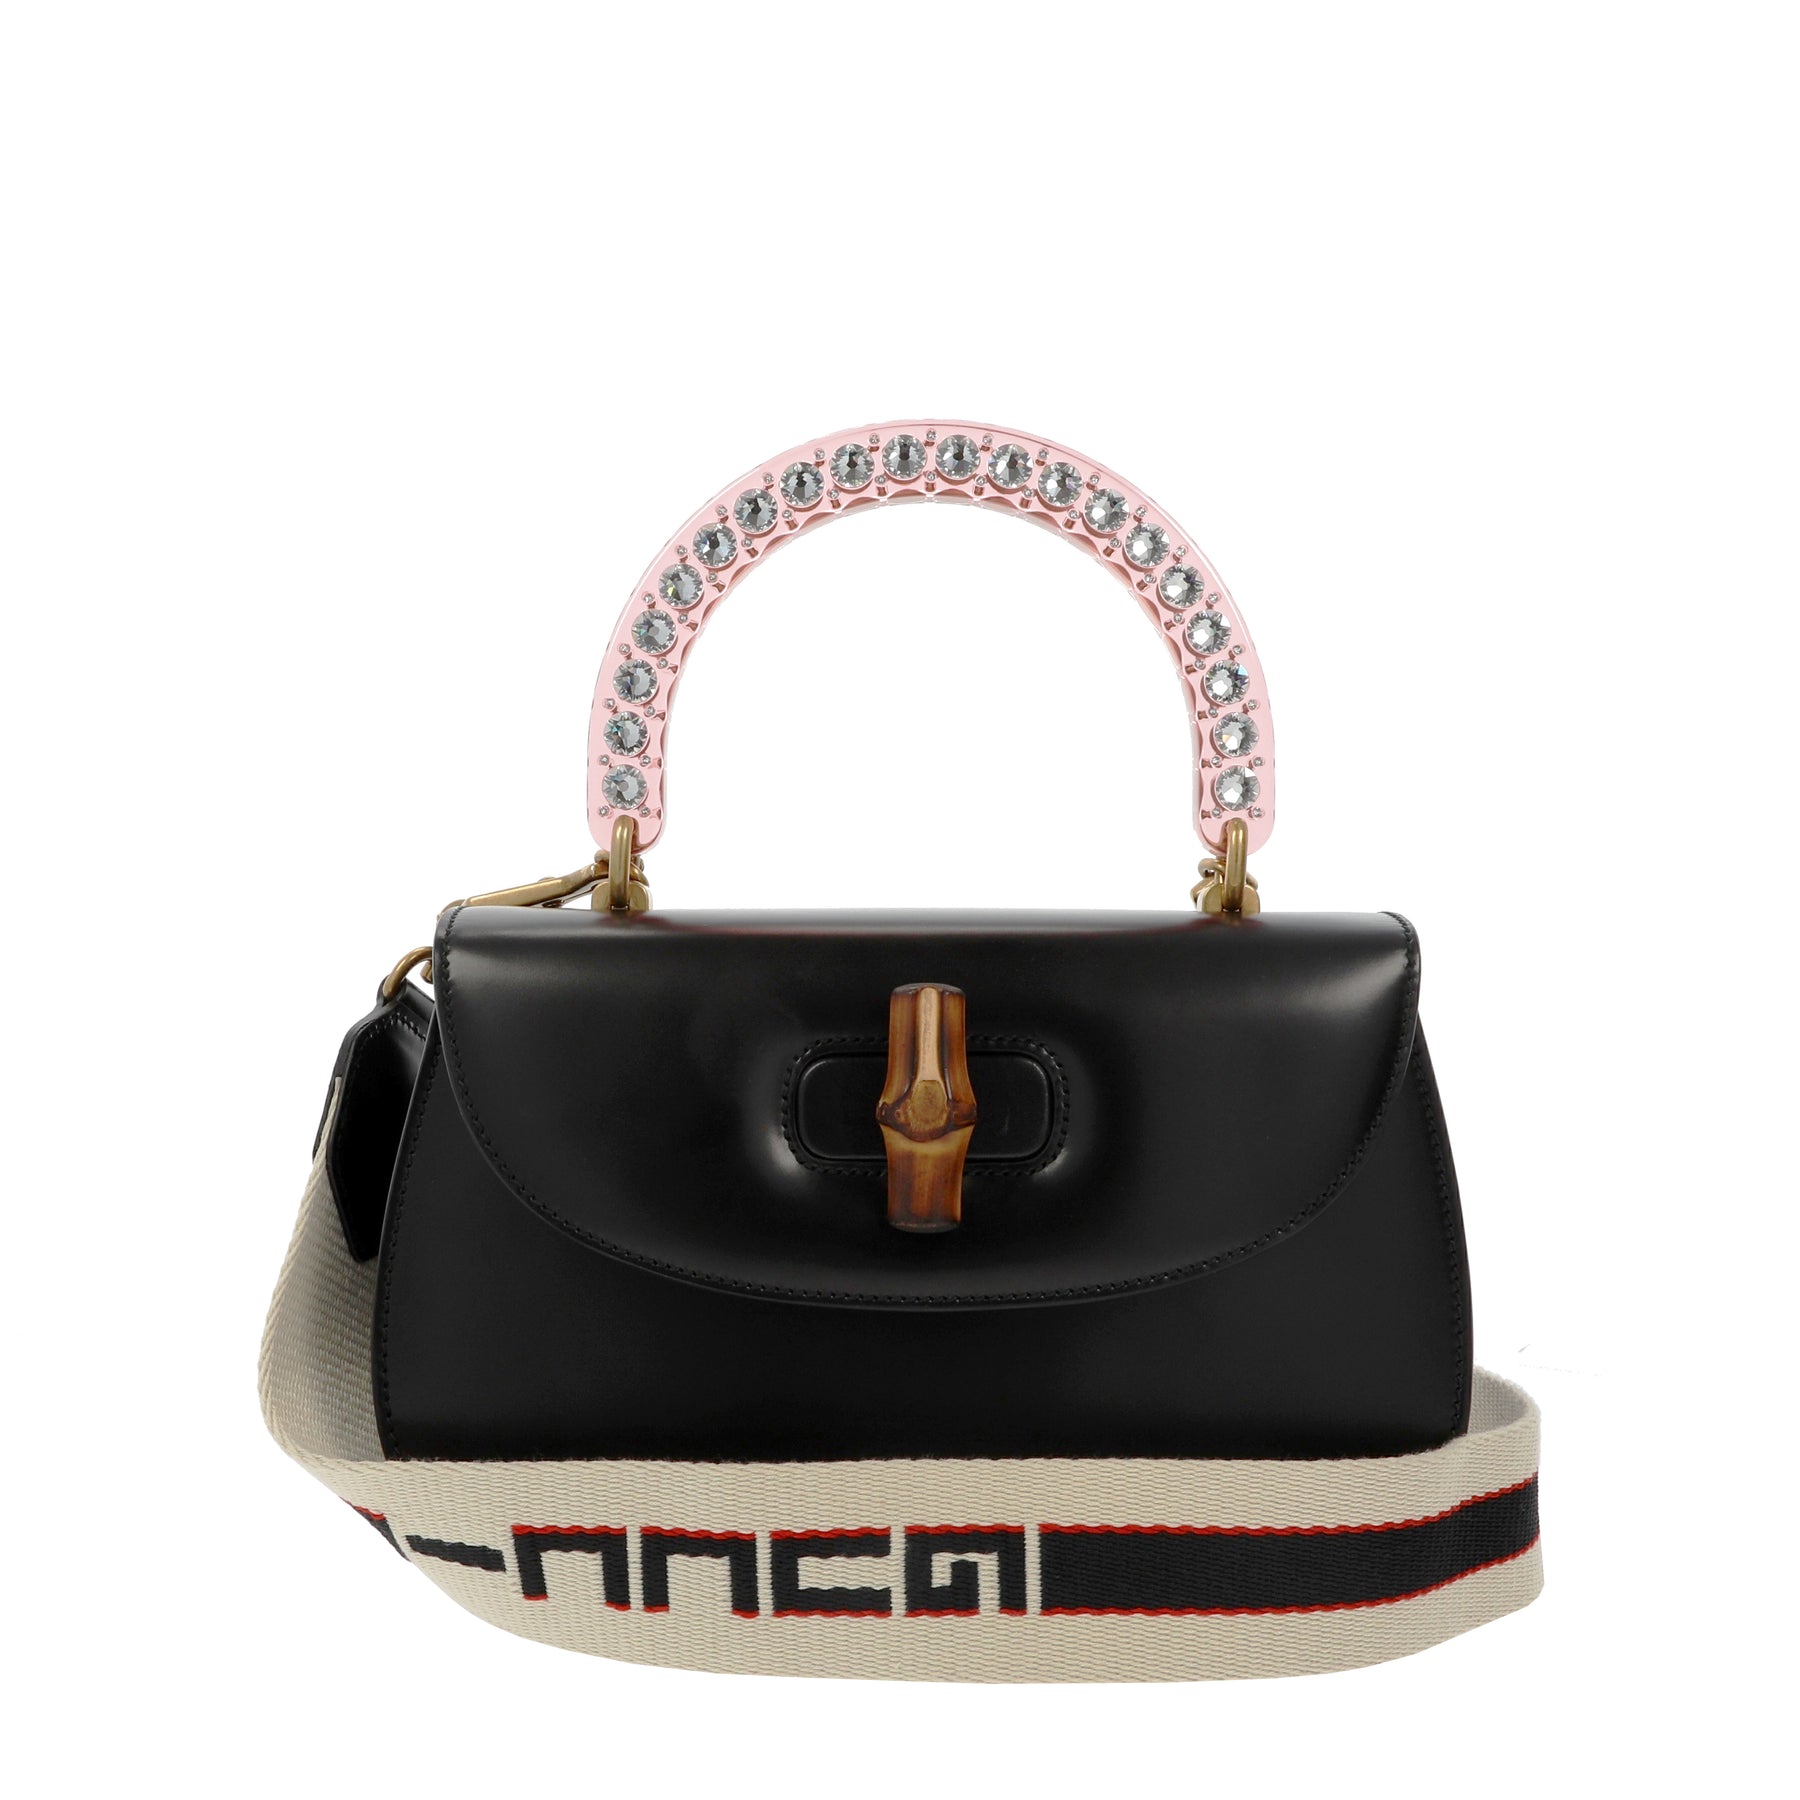 Gucci Bamboo Top-handle Limited Edition Shoulder Bag 25% off retail